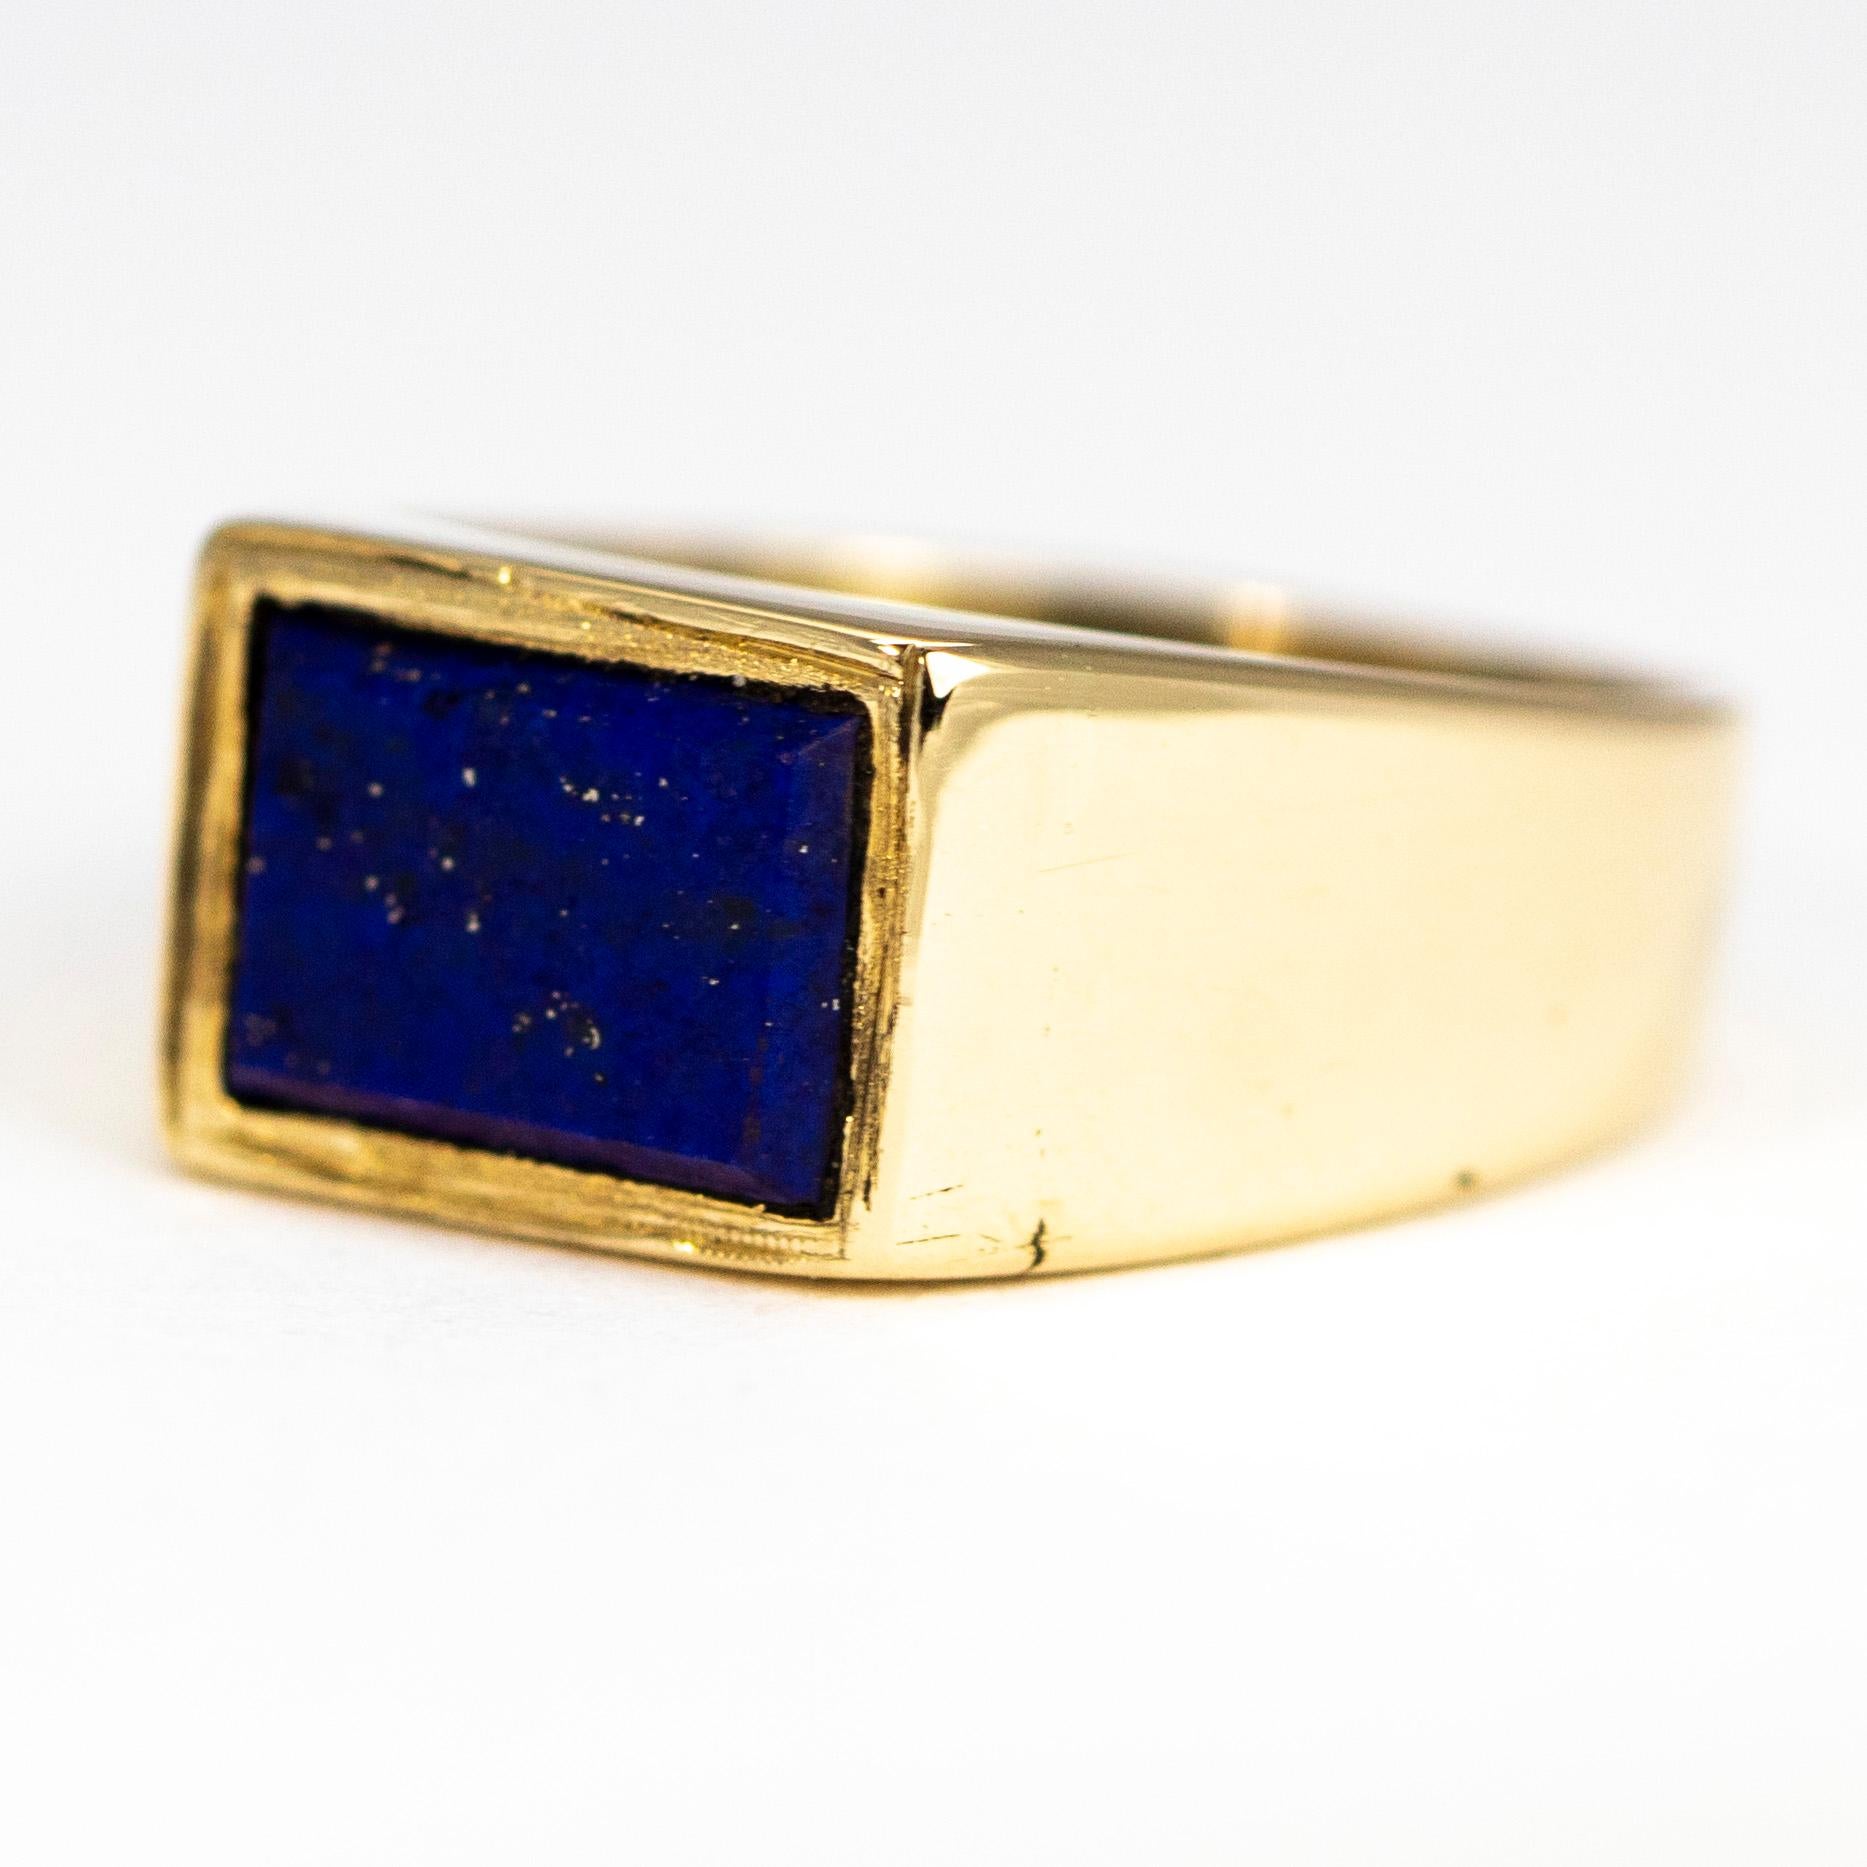 The main feature of this chunky angular signet ring is the bright blue lapis stone with wonderful gold flecks running through it. The stone is rectangular and is set flush within the 9ct gold band. 

Ring Size: H or 3 3/4
Stone Dimensions: 5.5 x 8mm